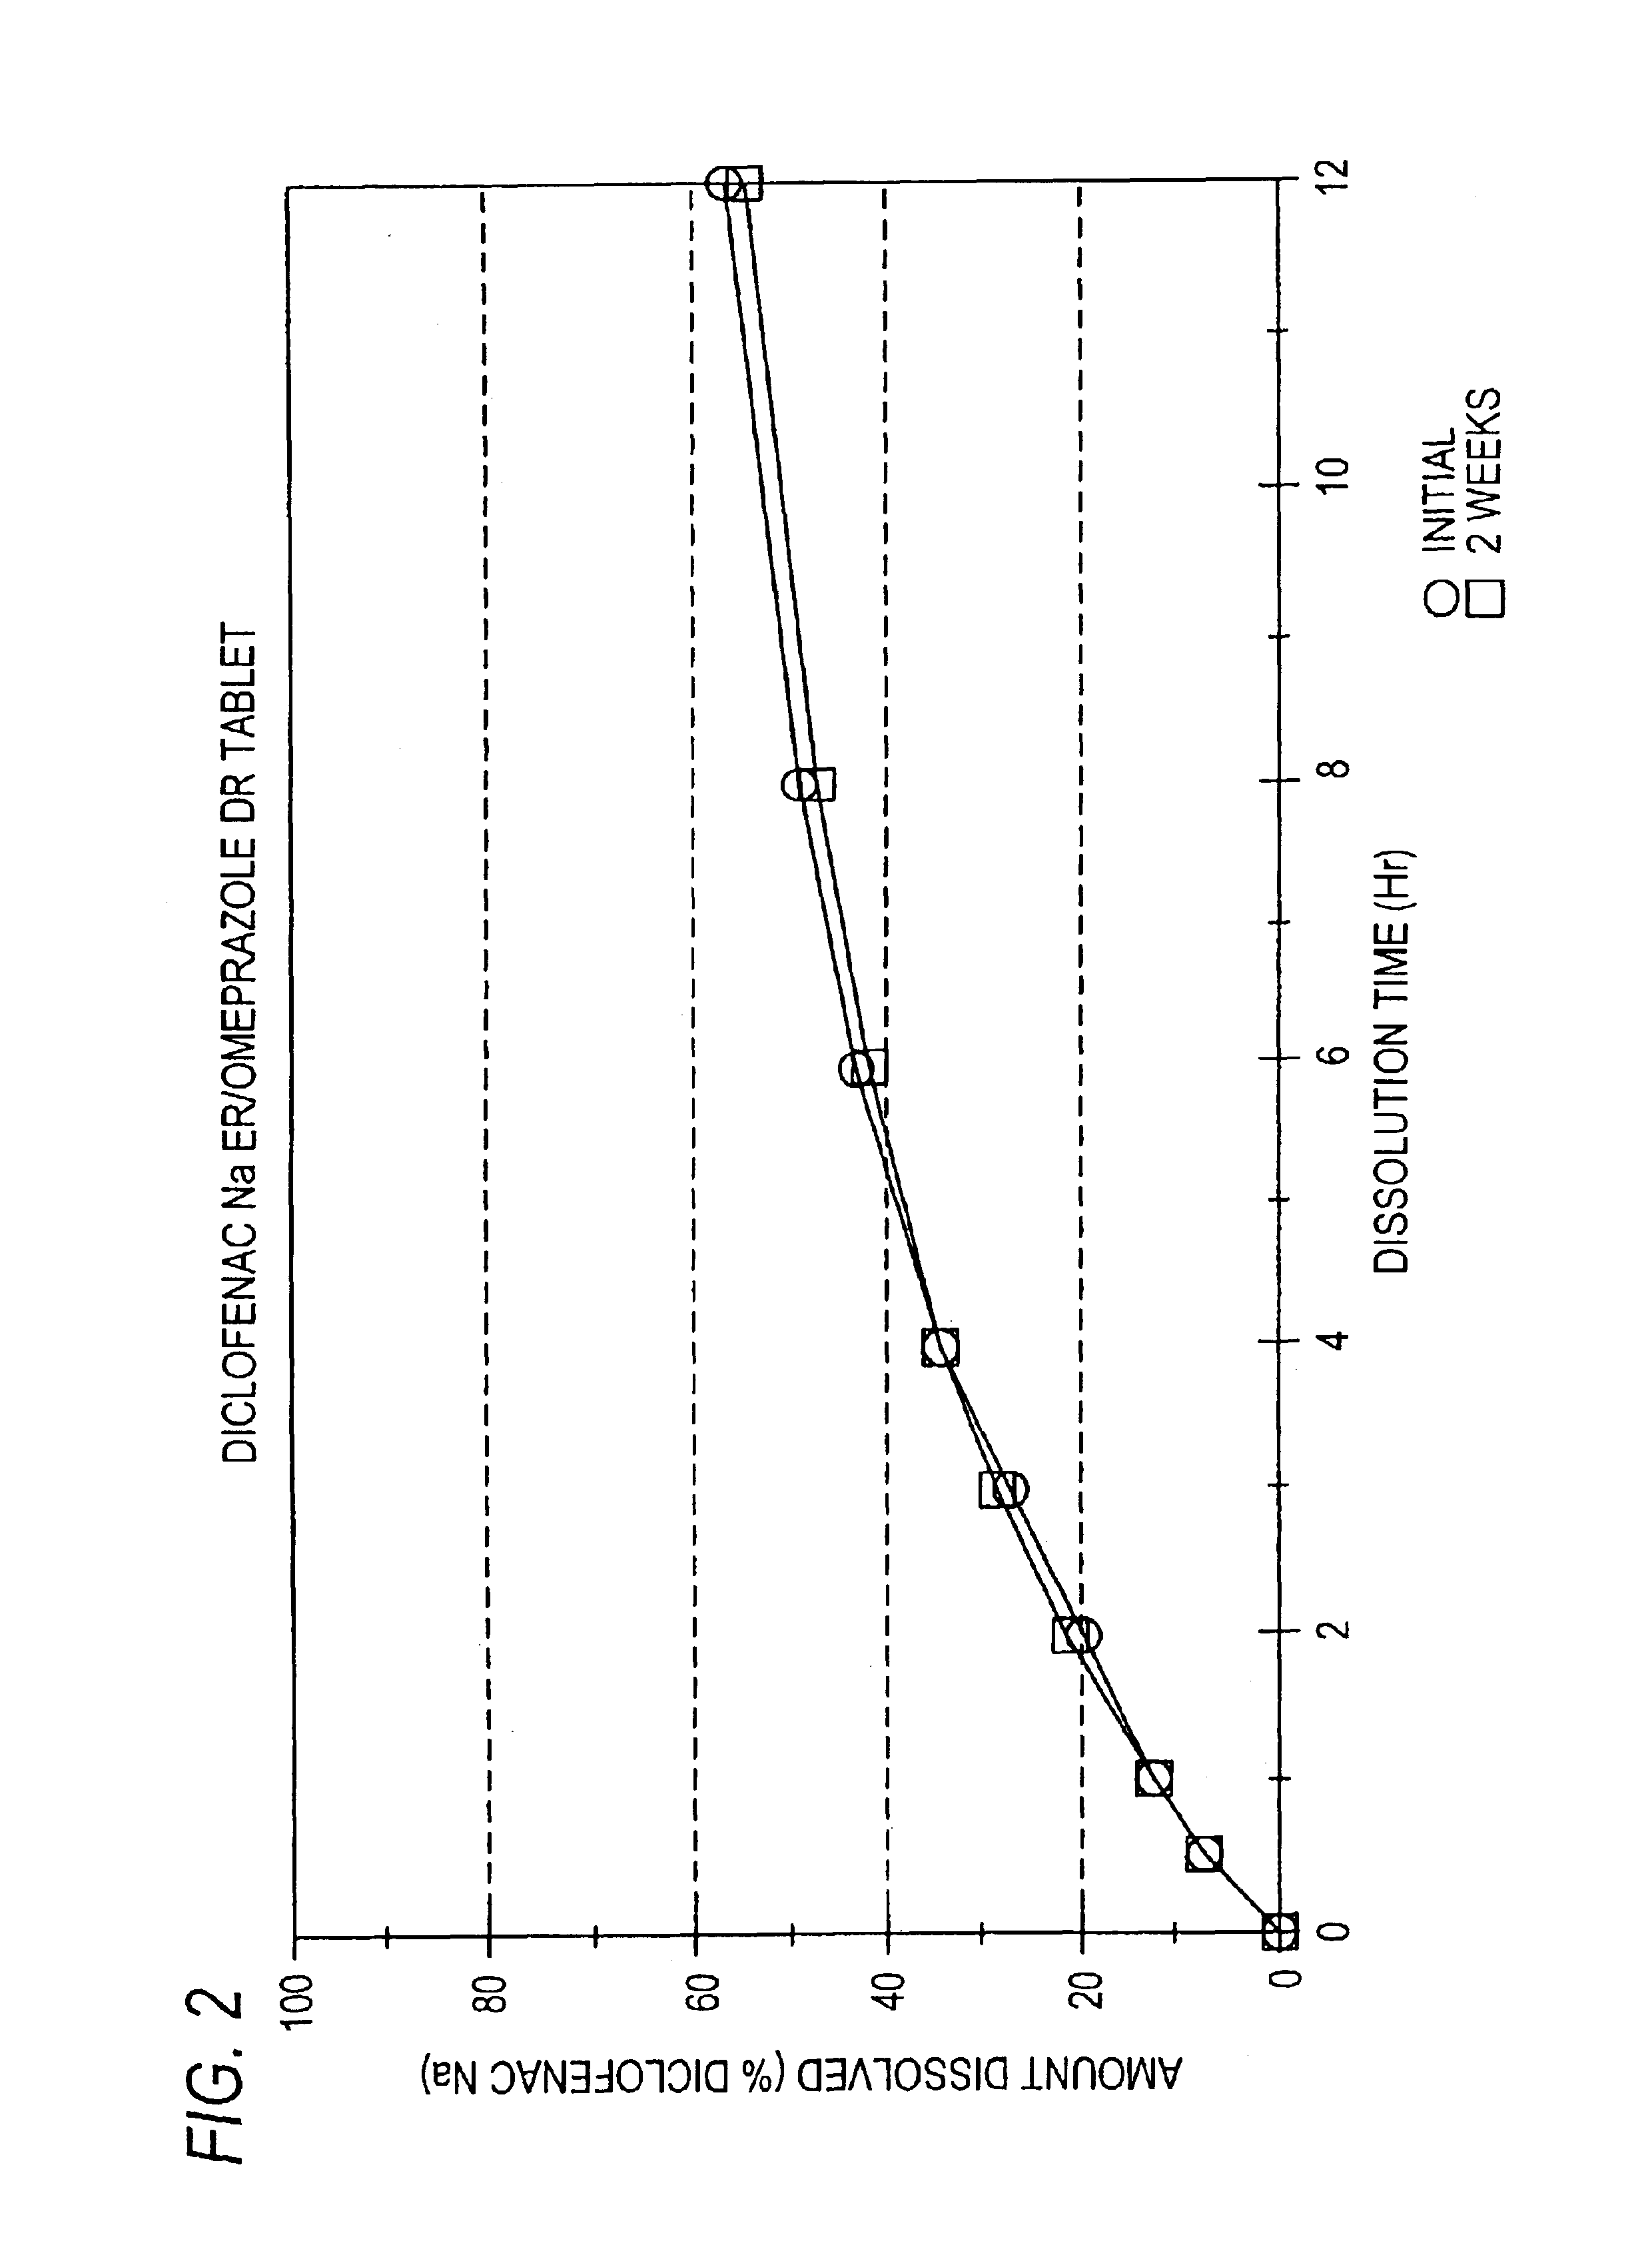 Pharmaceutical formulations containing a non-steroidal antiinflammatory drug and a proton pump inhibitor